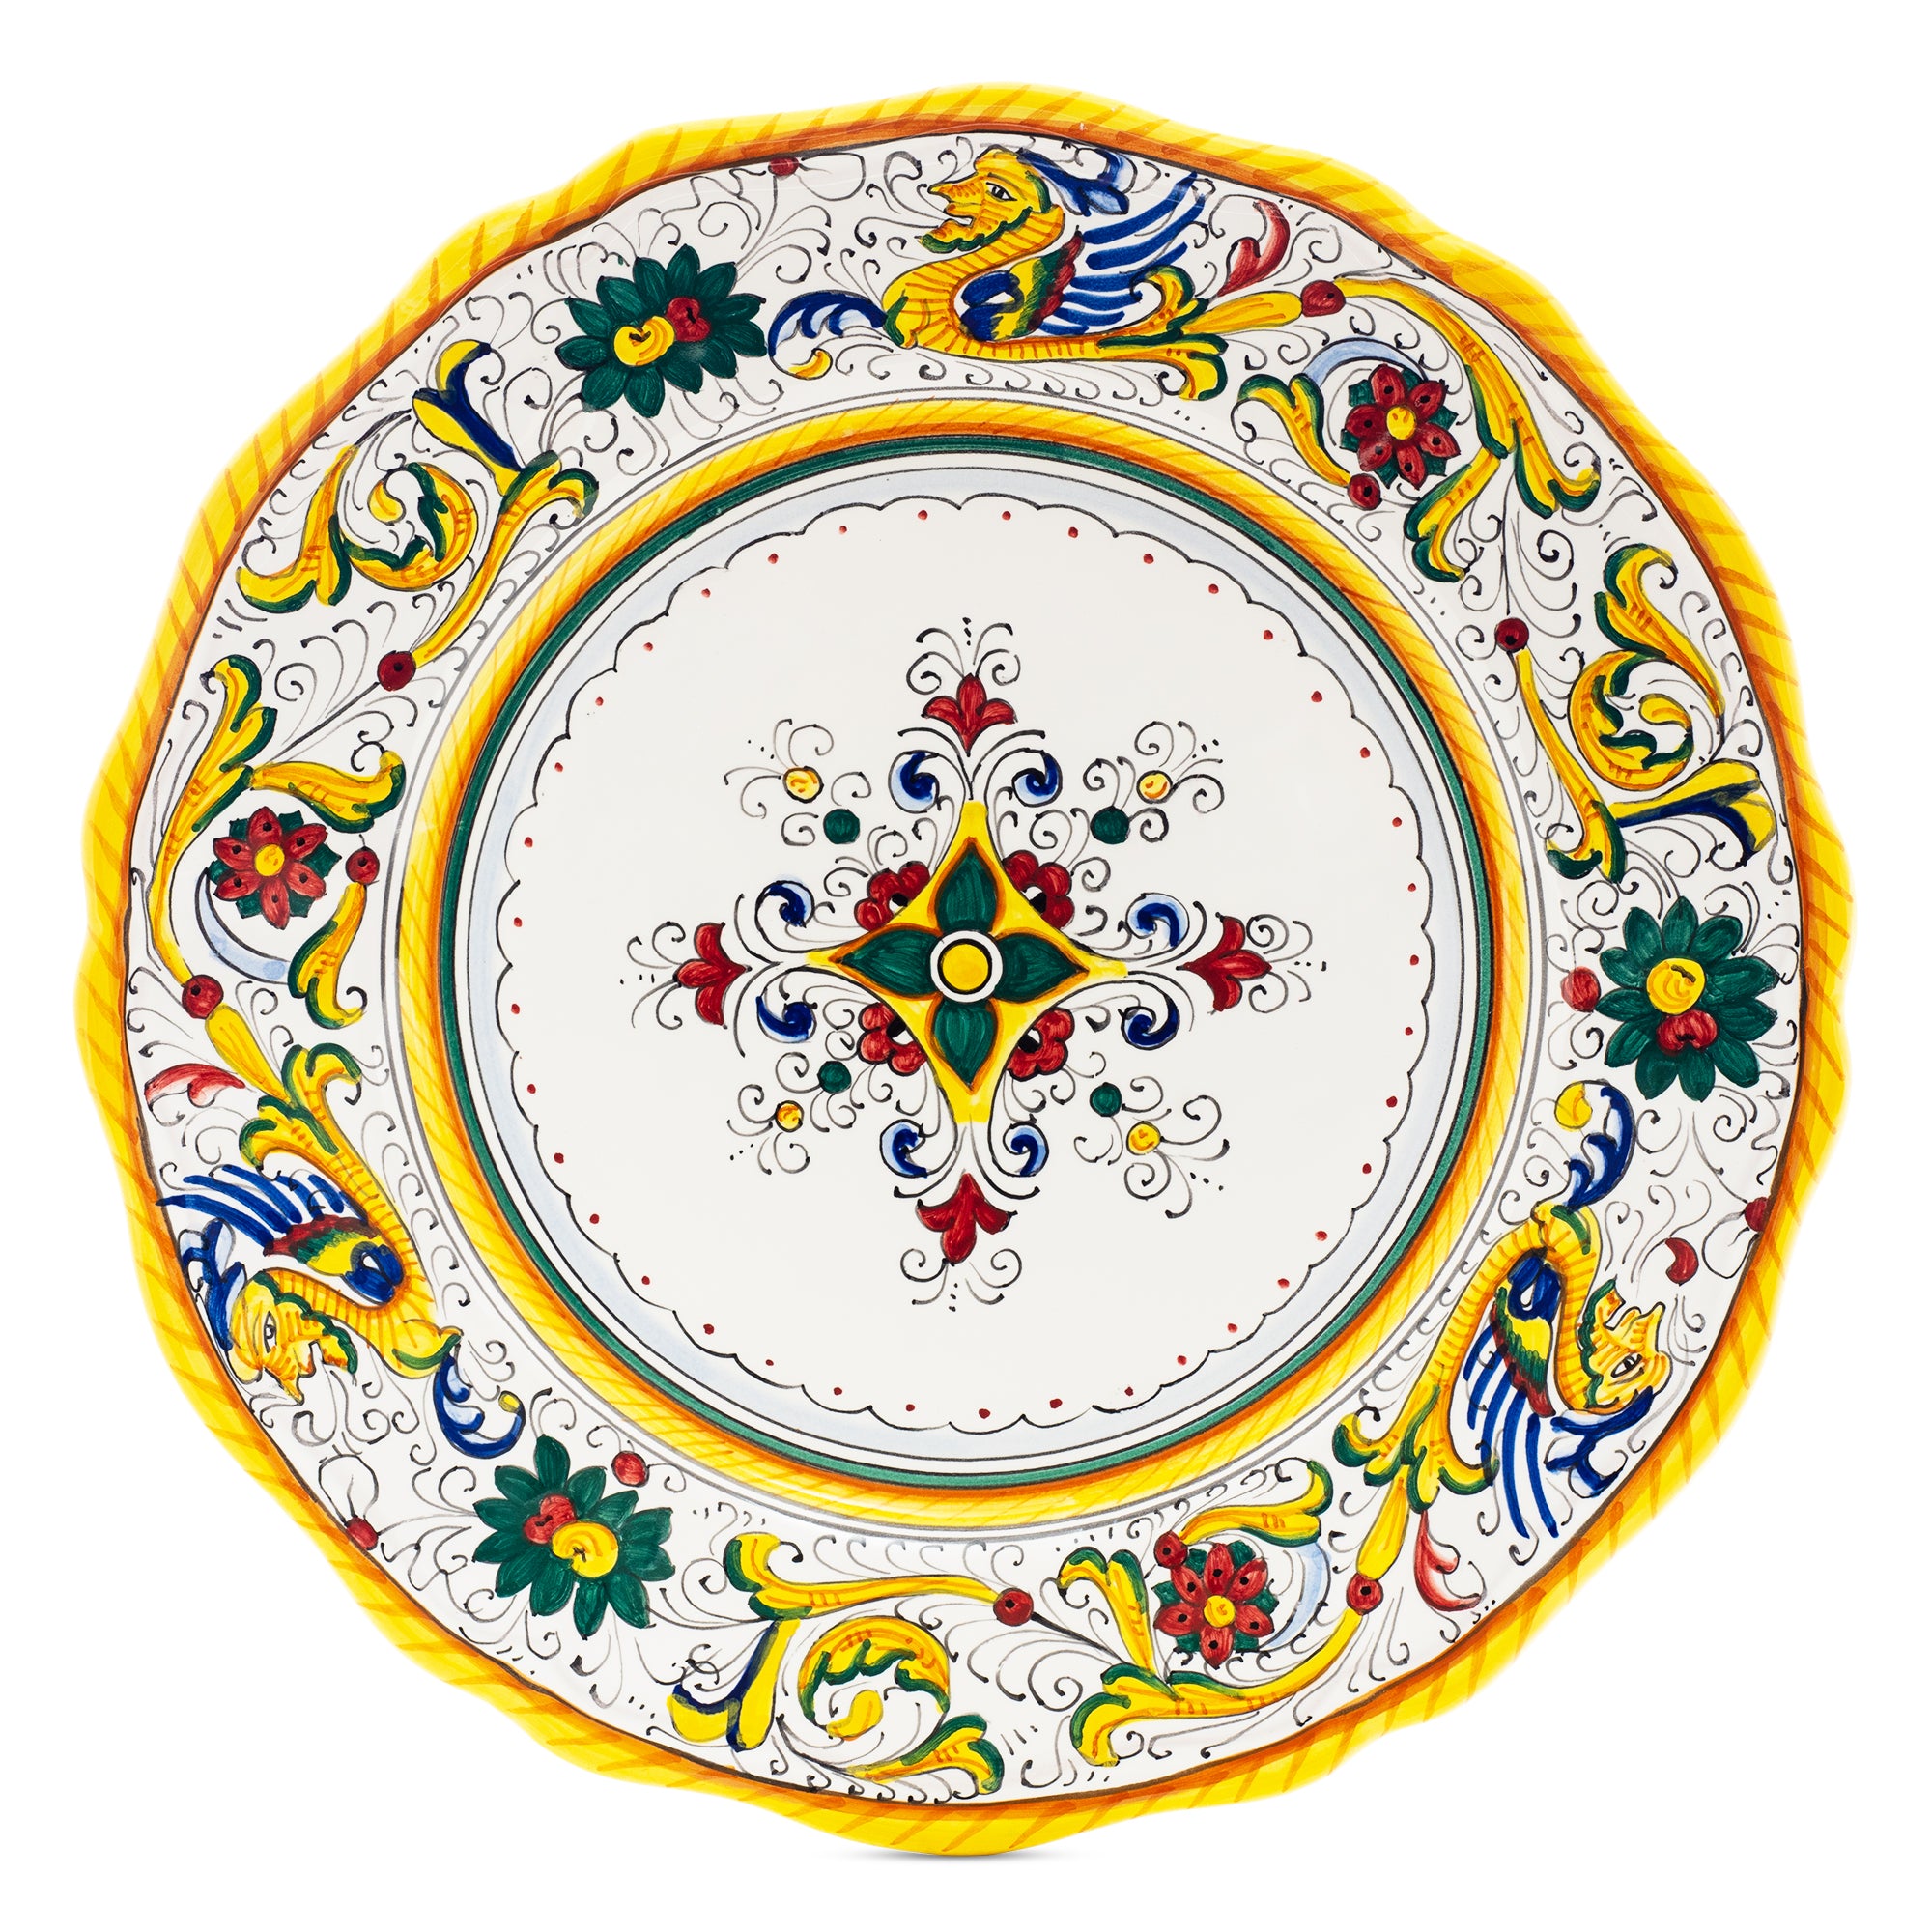 Raffaellesco Dinner Plate, Full Design, ceramics, pottery, italian design, majolica, handmade, handcrafted, handpainted, home decor, kitchen art, home goods, deruta, majolica, Artisan, treasures, traditional art, modern art, gift ideas, style, SF, shop small business, artists, shop online, landmark store, legacy, one of a kind, limited edition, gift guide, gift shop, retail shop, decorations, shopping, italy, home staging, home decorating, home interiors